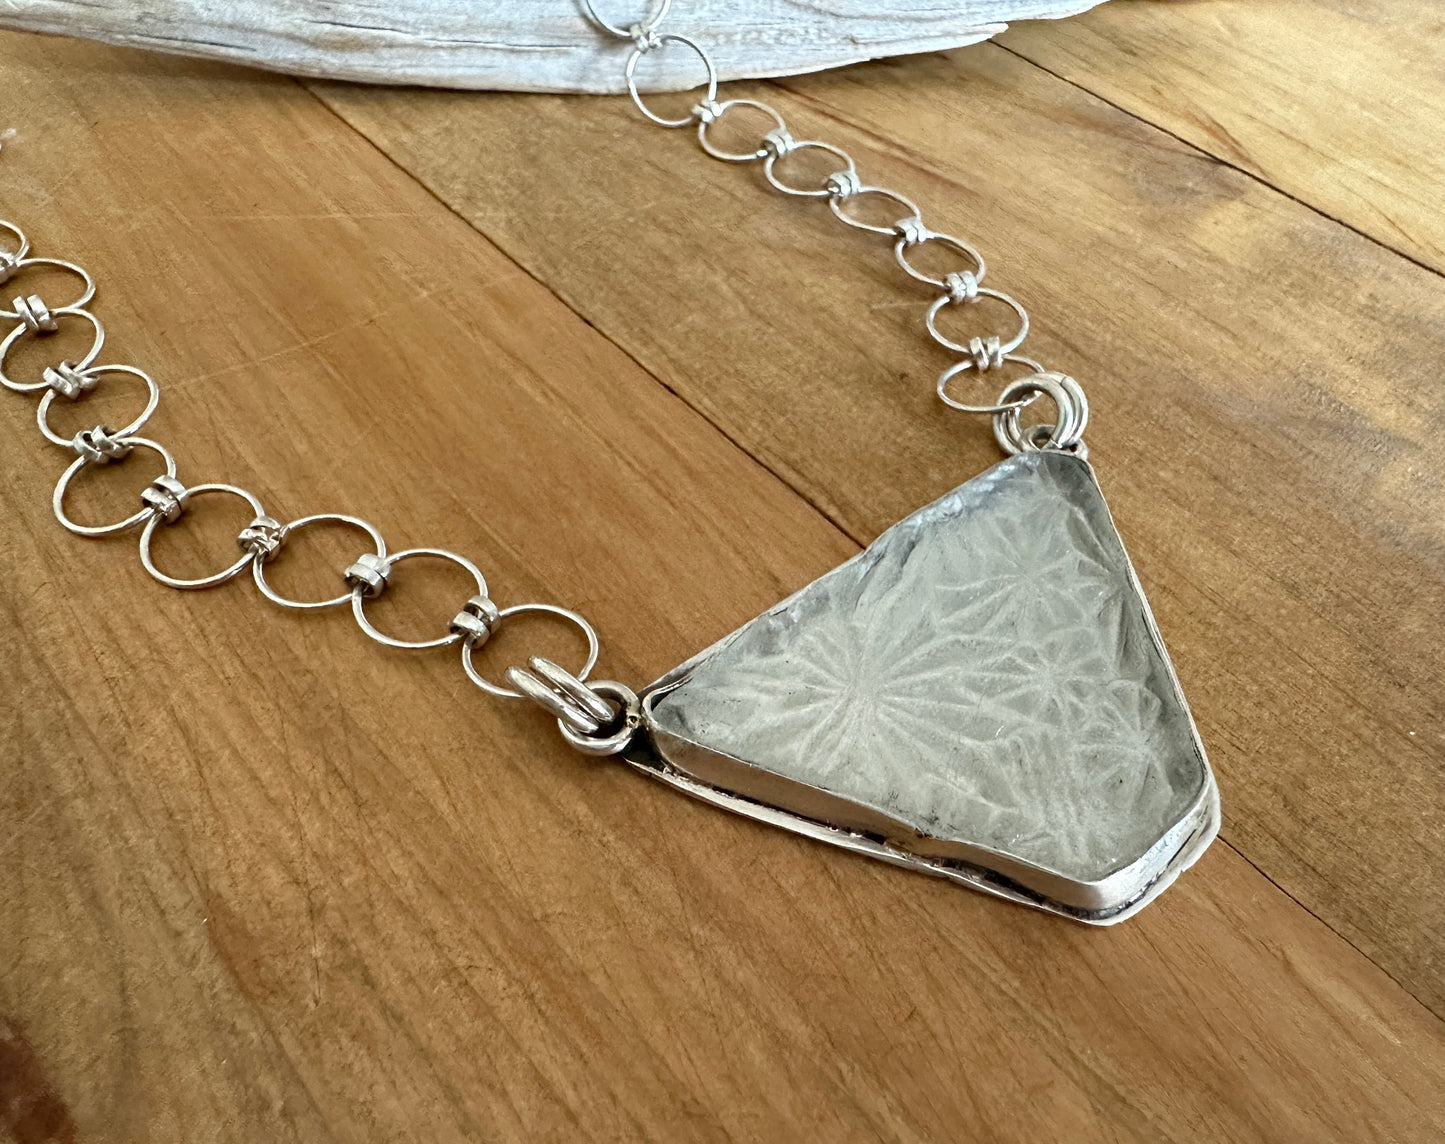 White Patterned Sea Glass Necklace